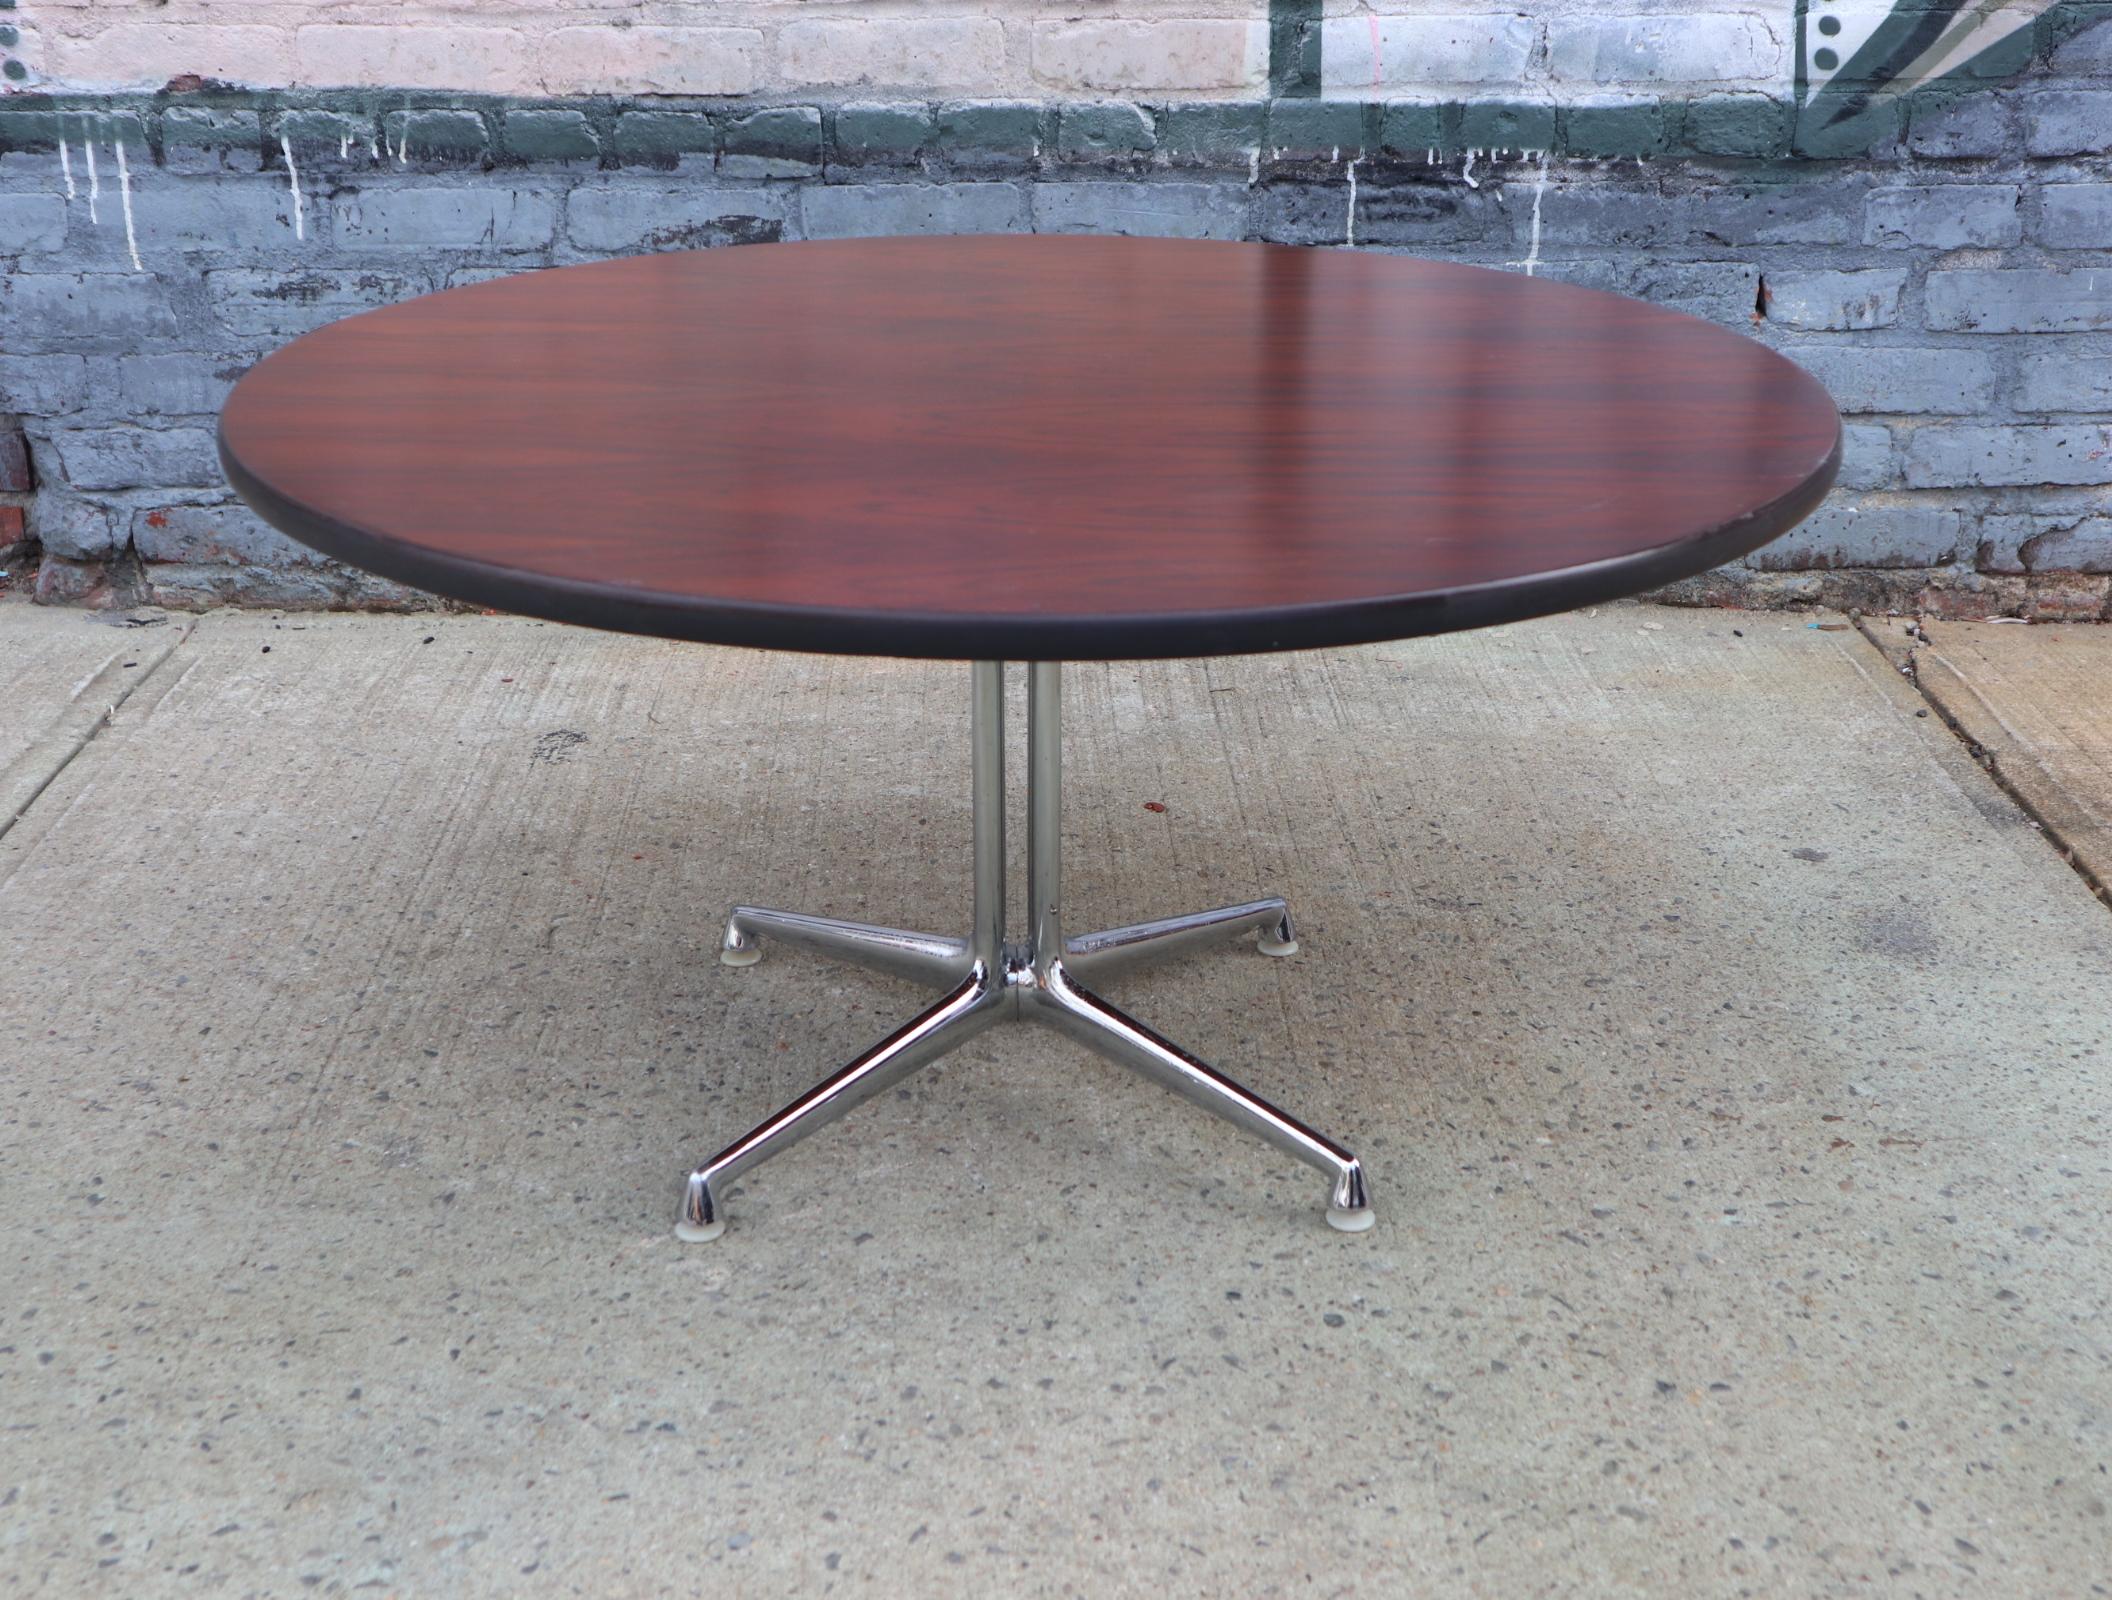 Super and very rare Eames La Fonda coffee table in rosewood. The Eameses created this base specifically for the Alexander Girard designed La Fonda del Sol restaurant in the Time Life building in Manhattan in 1960. This coffee table usually comes